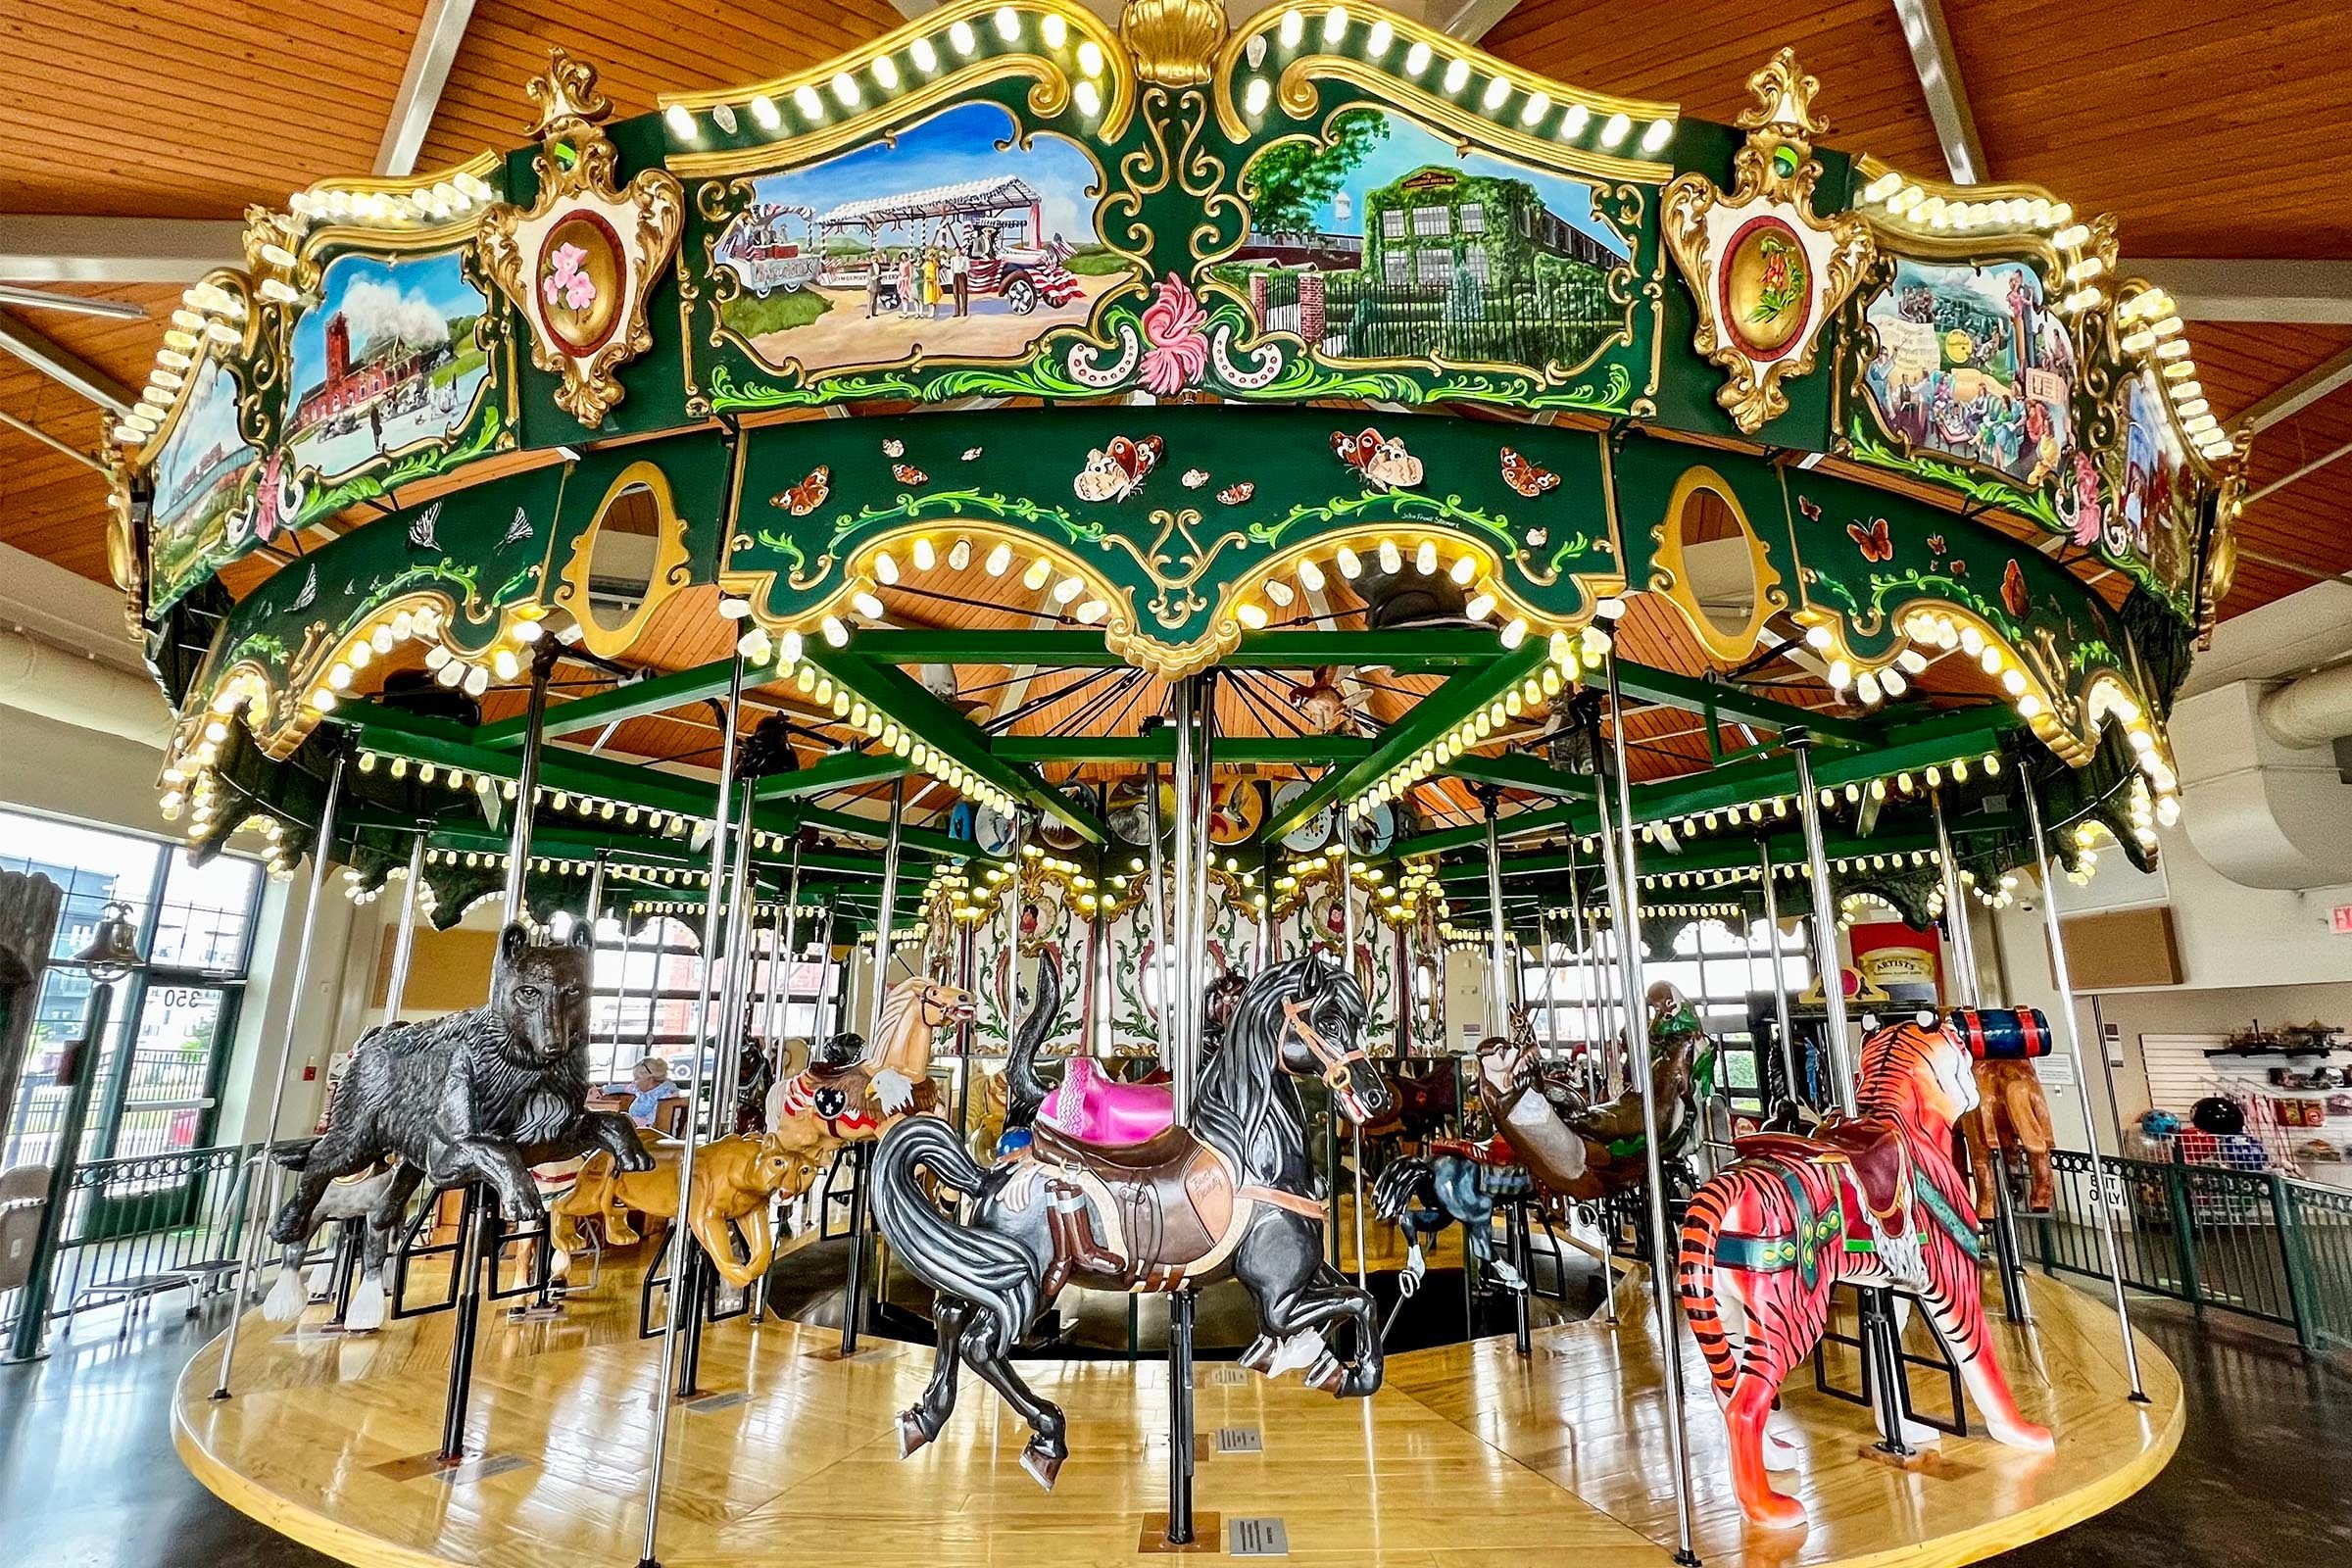 Nicest Places in America 2022 Kingsport Carousel in Kingsport, TN hq nude image